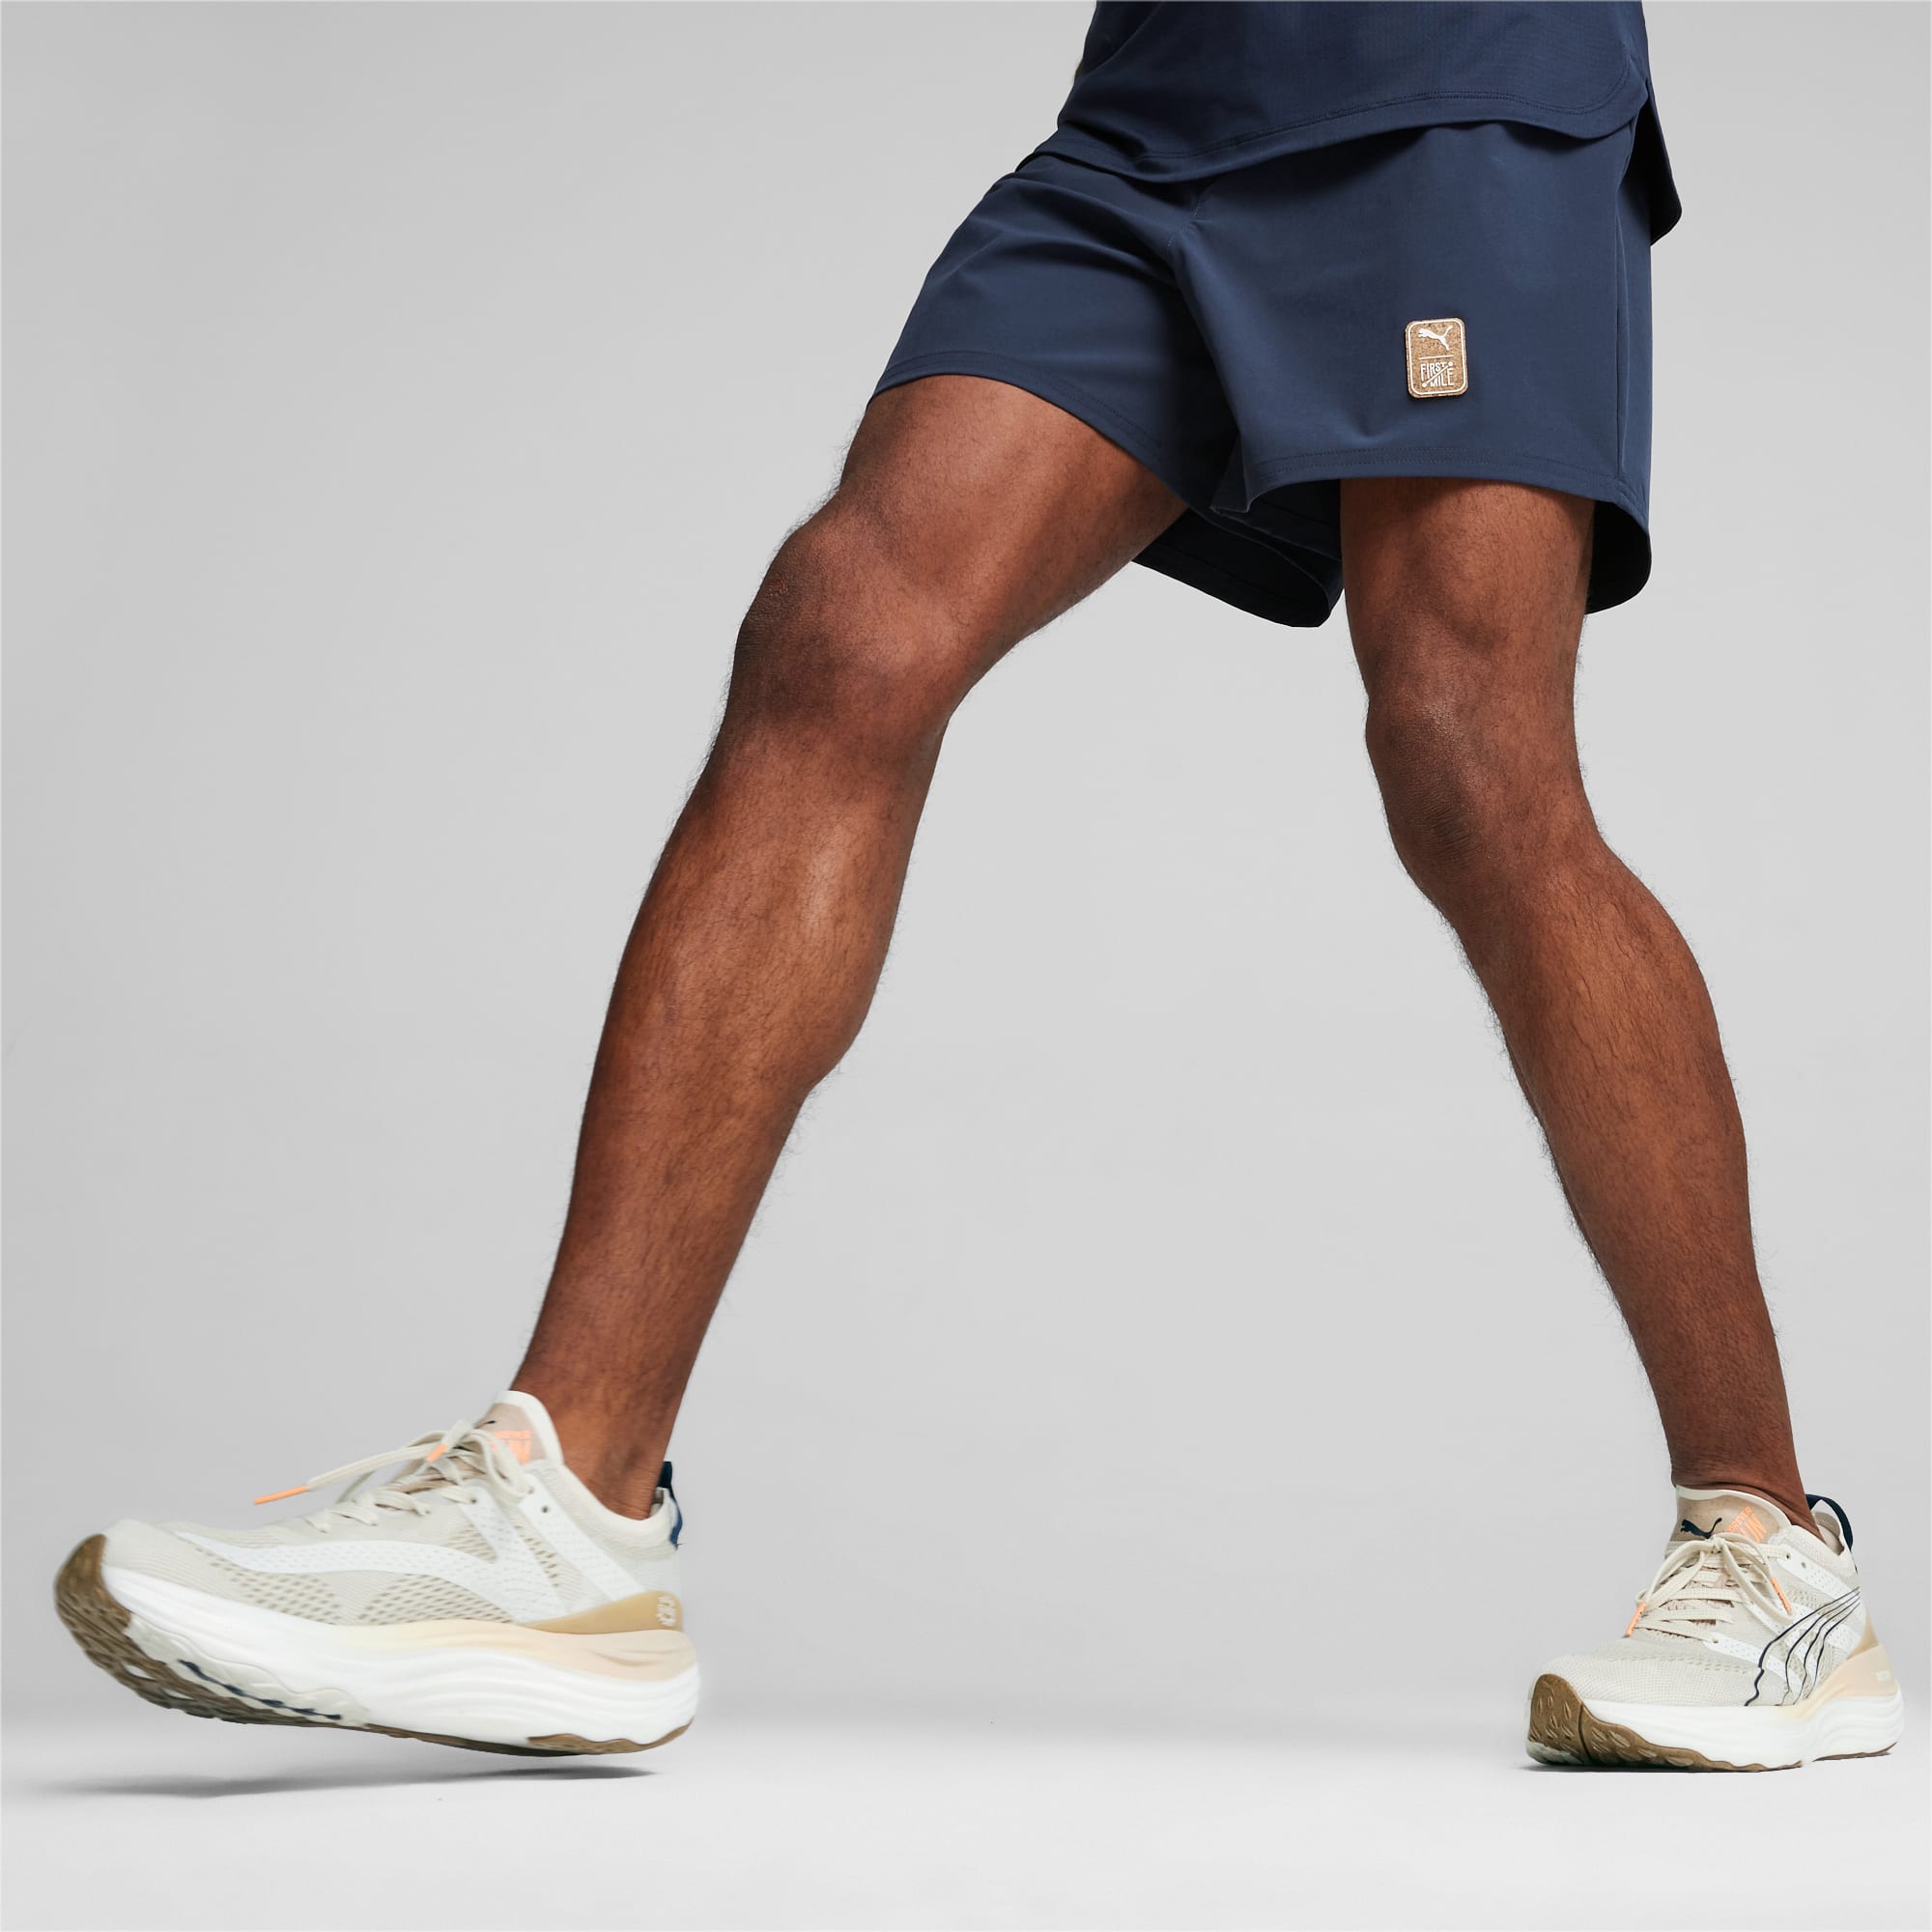 PUMA x First Mile Men's 5 Woven Shorts